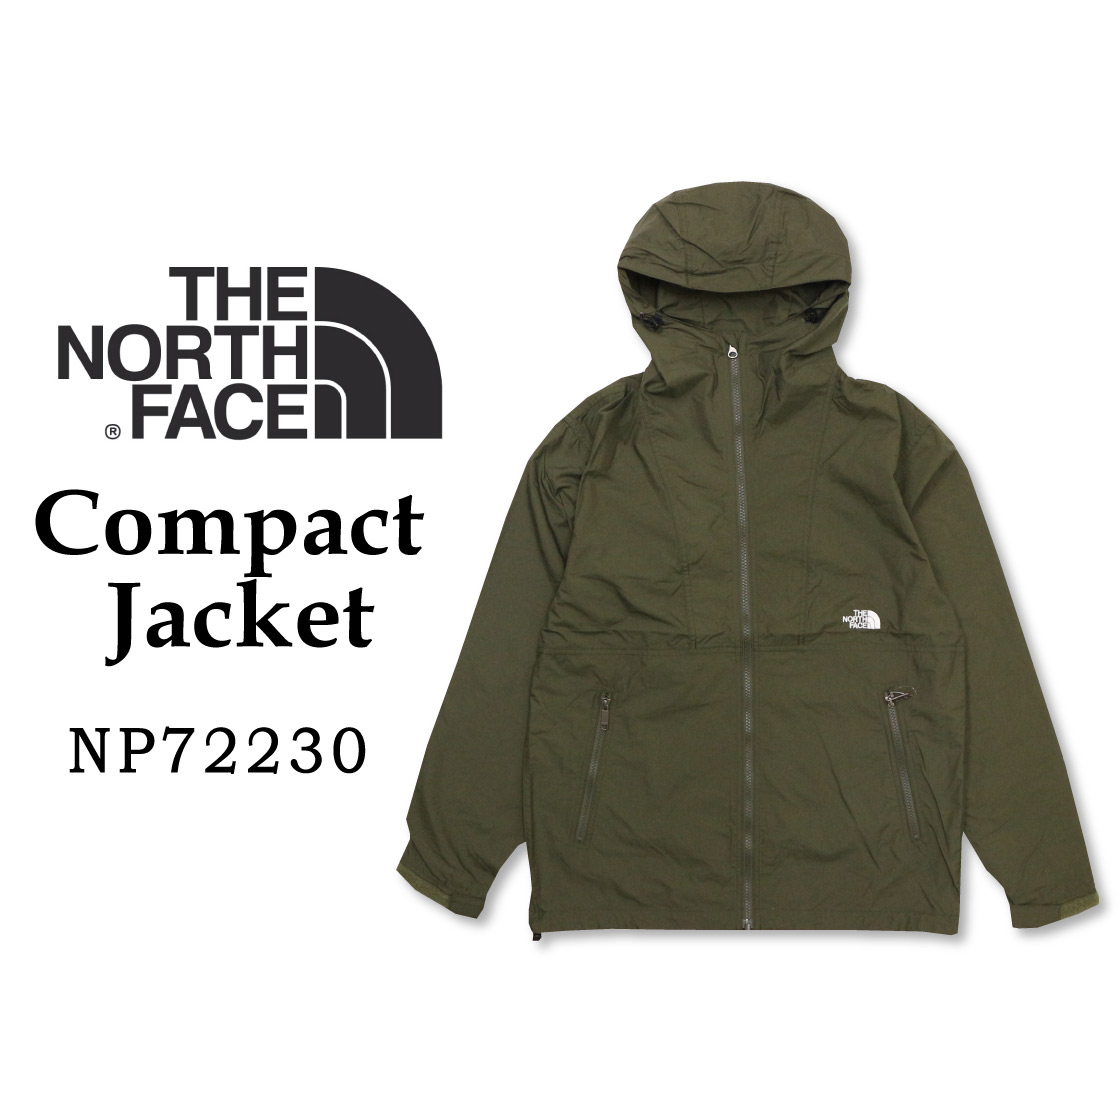 THE NORTH FACE ザ ノースフェイス Compact Jacket コンパクト